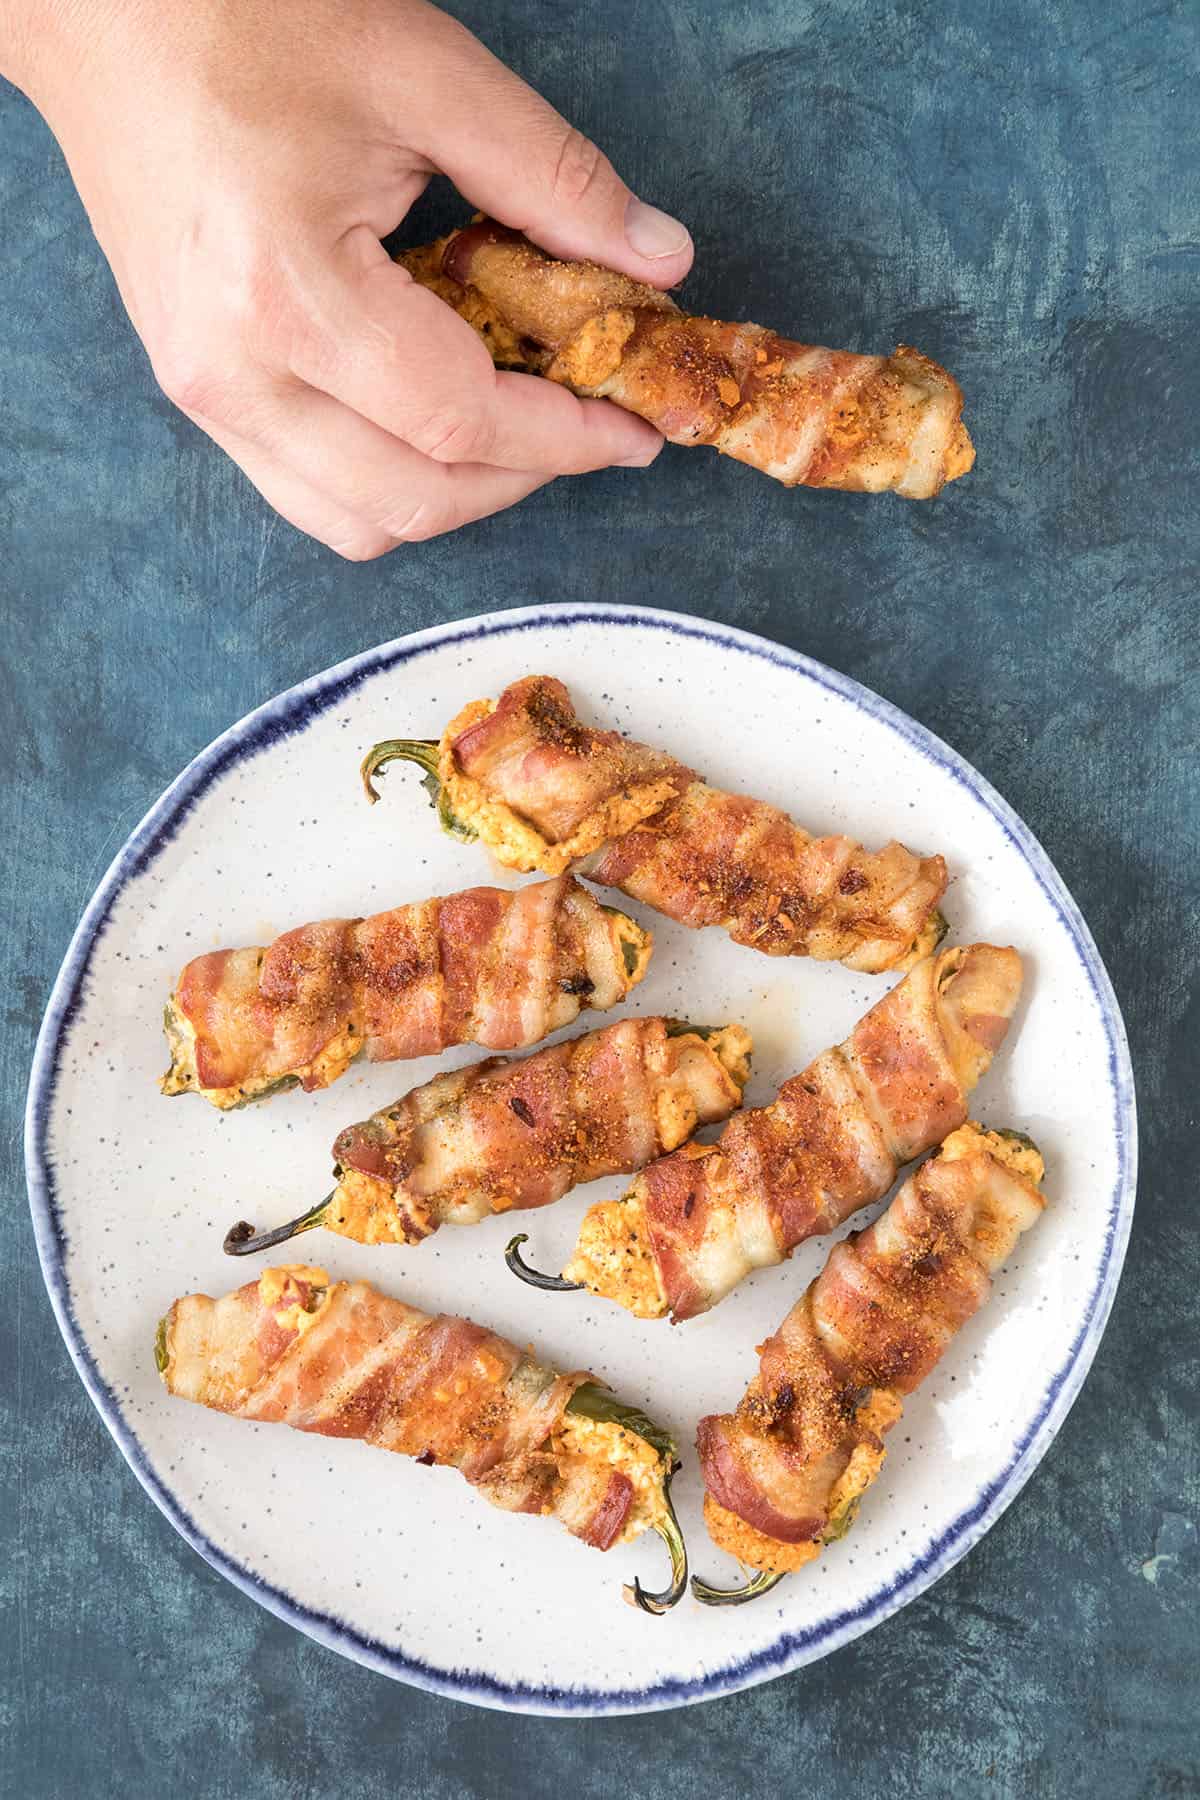 A Bacon Wrapped Jalapeno Popper in my hand, with extras plated